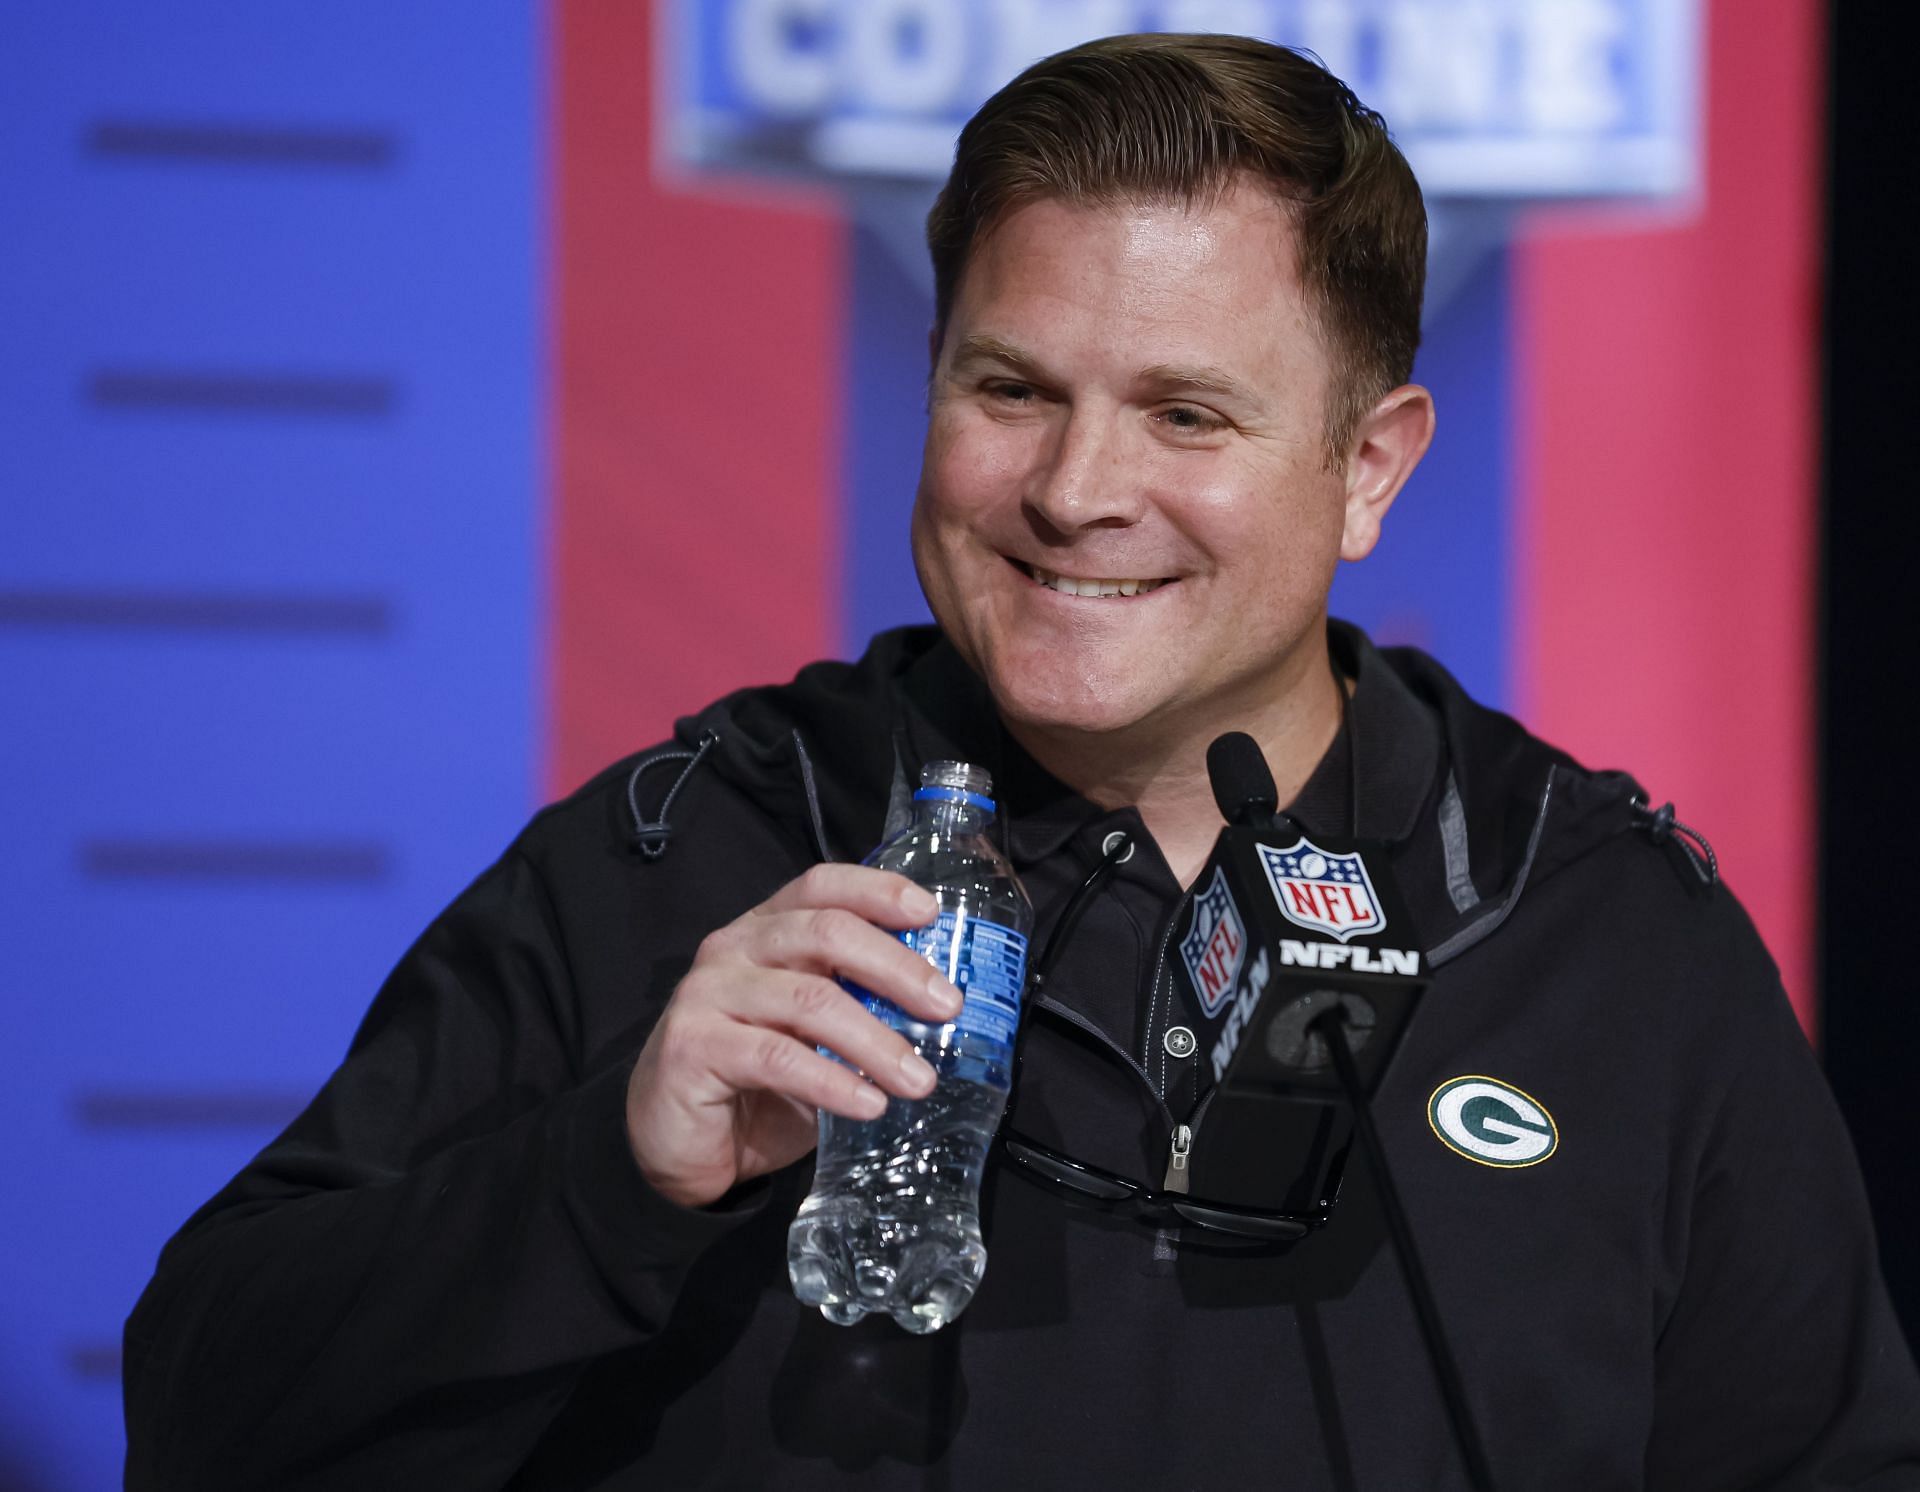 Green Bay Packers general manager Brian Gutekunst at the NFL Combine